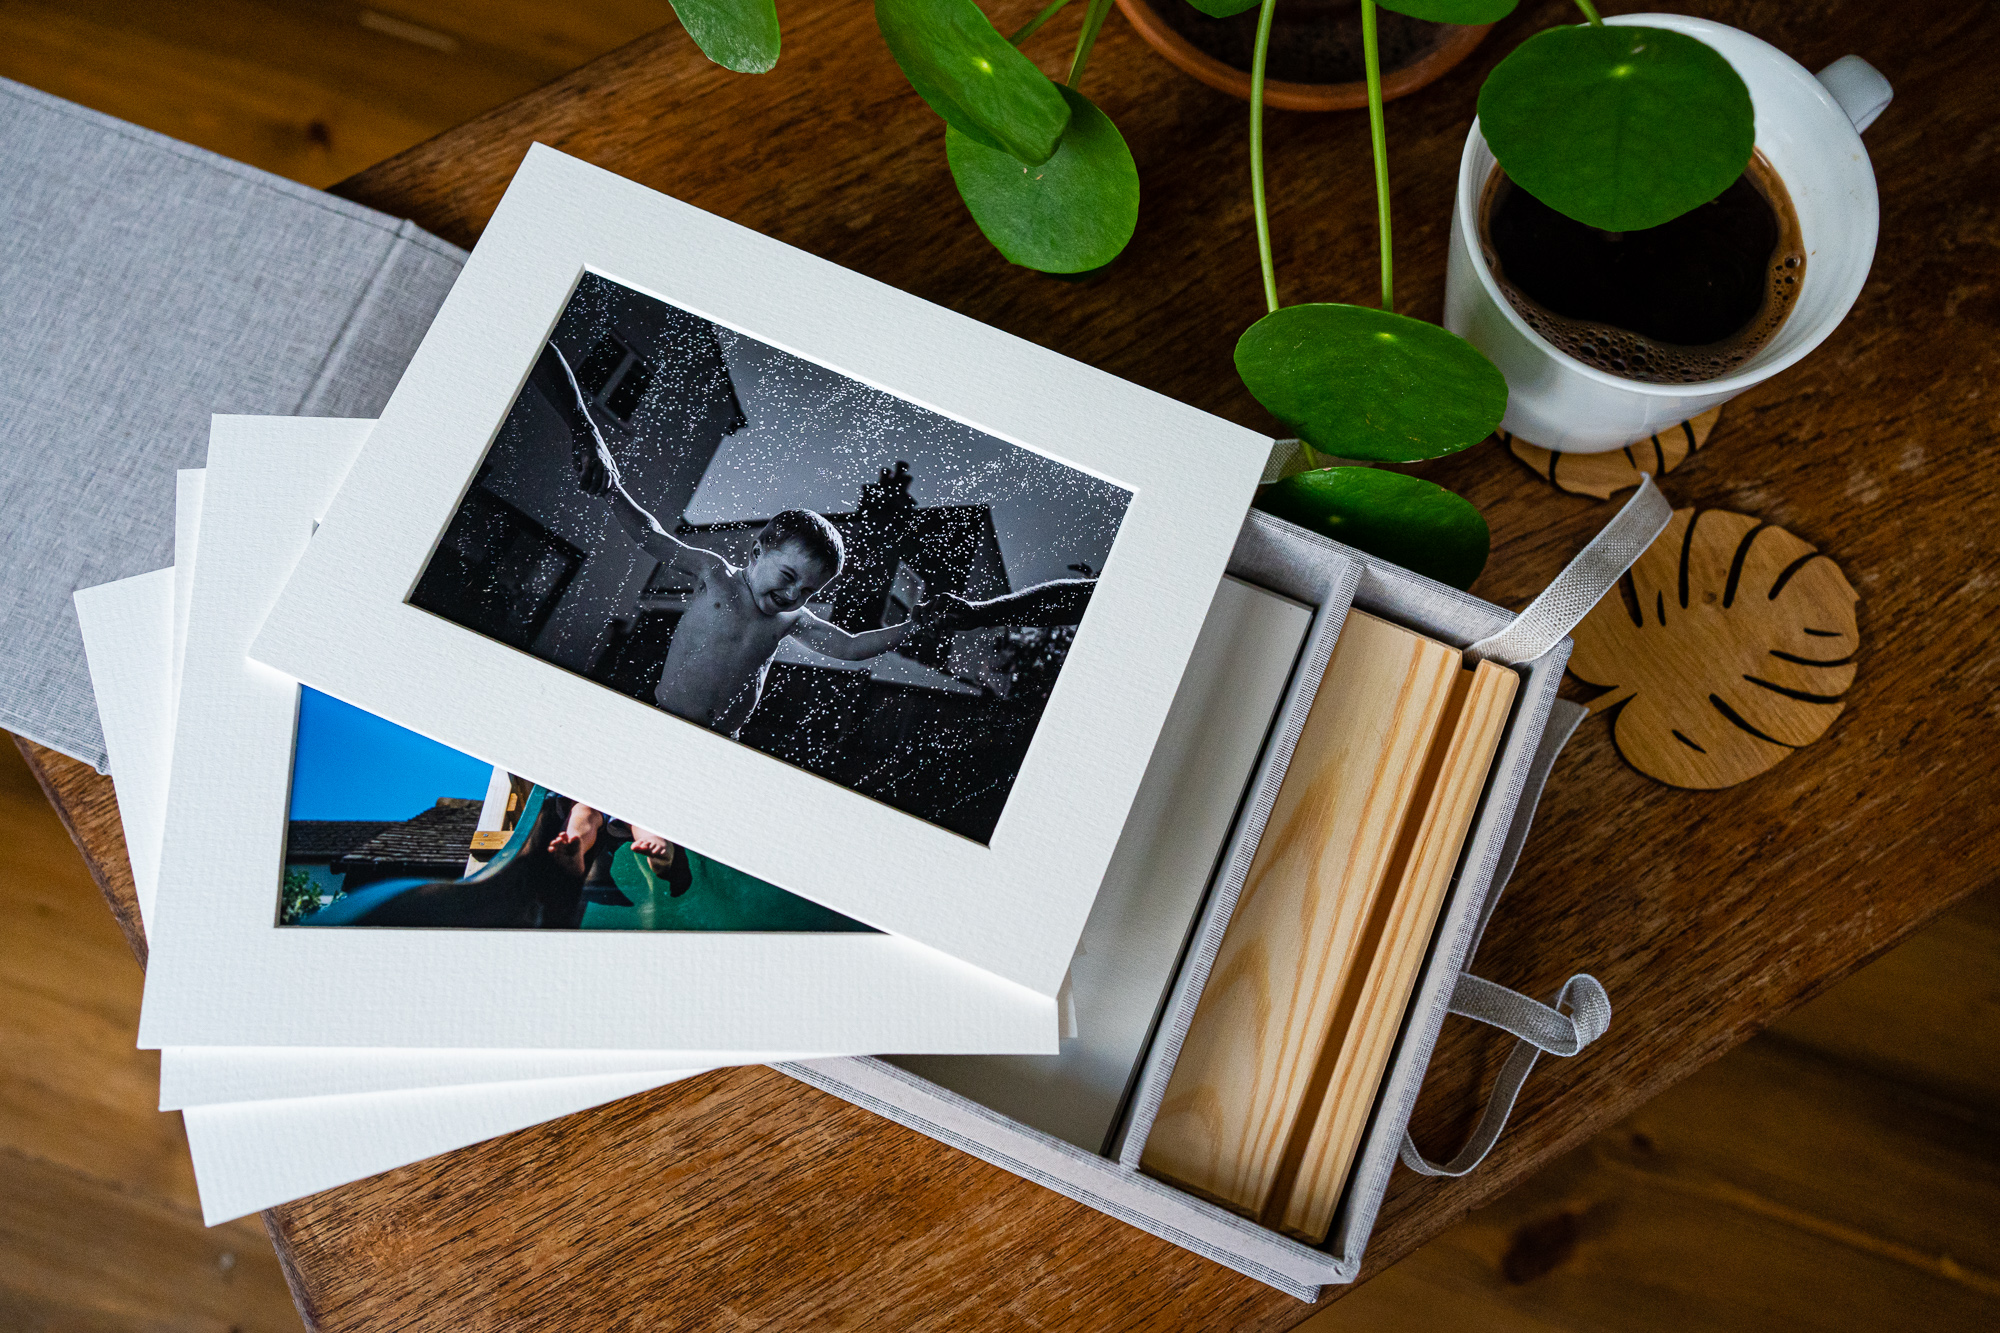 Selection of professional family photograph prints displayed on a coffee table